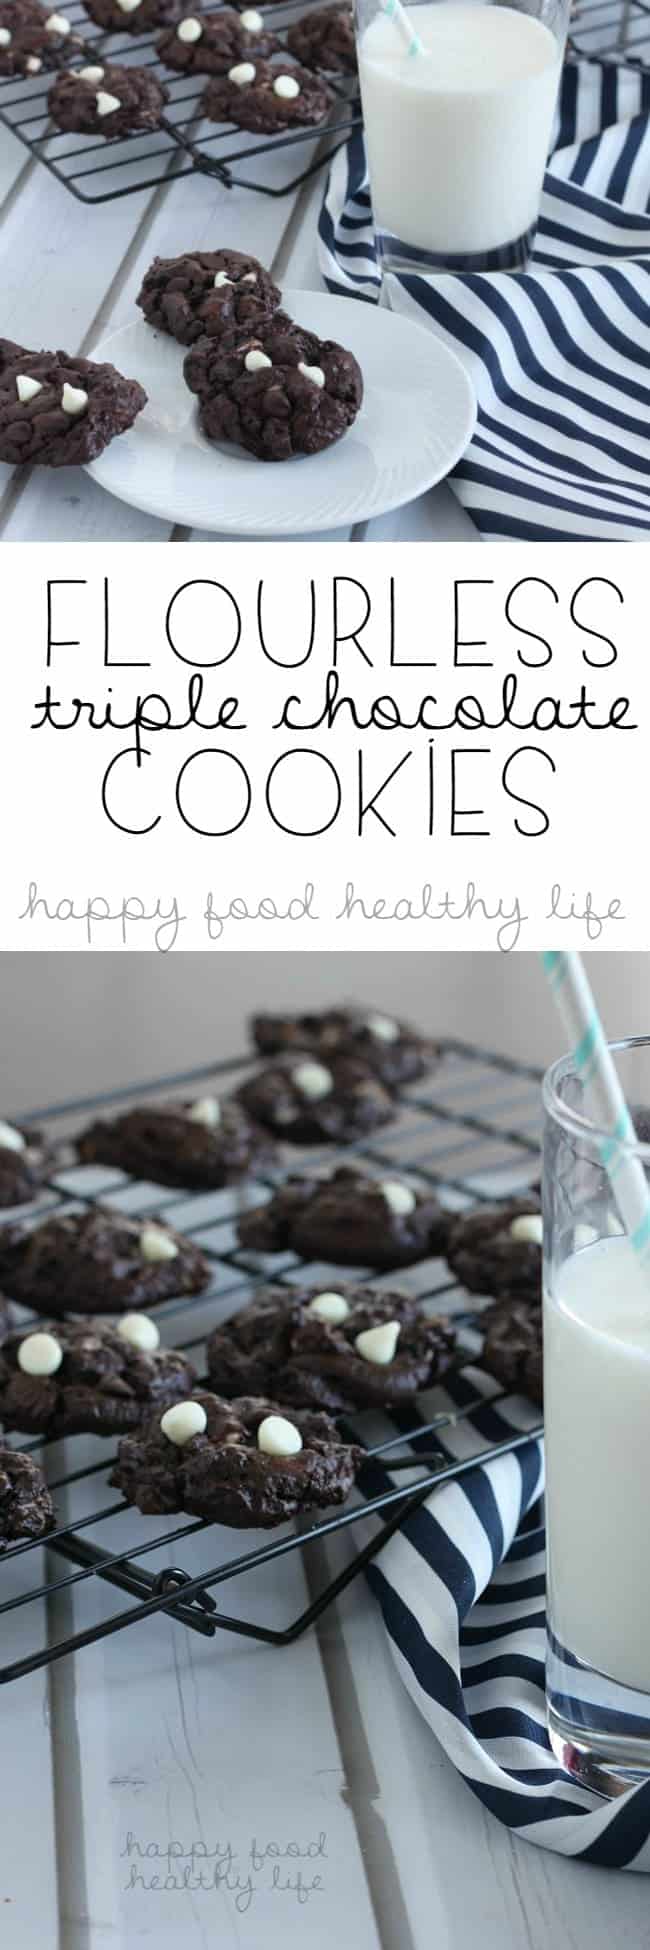 Flourless Triple Chocolate Cookies - I never knew gluten free could taste this rich and delectable! | www.happyfoodhealthylife.com